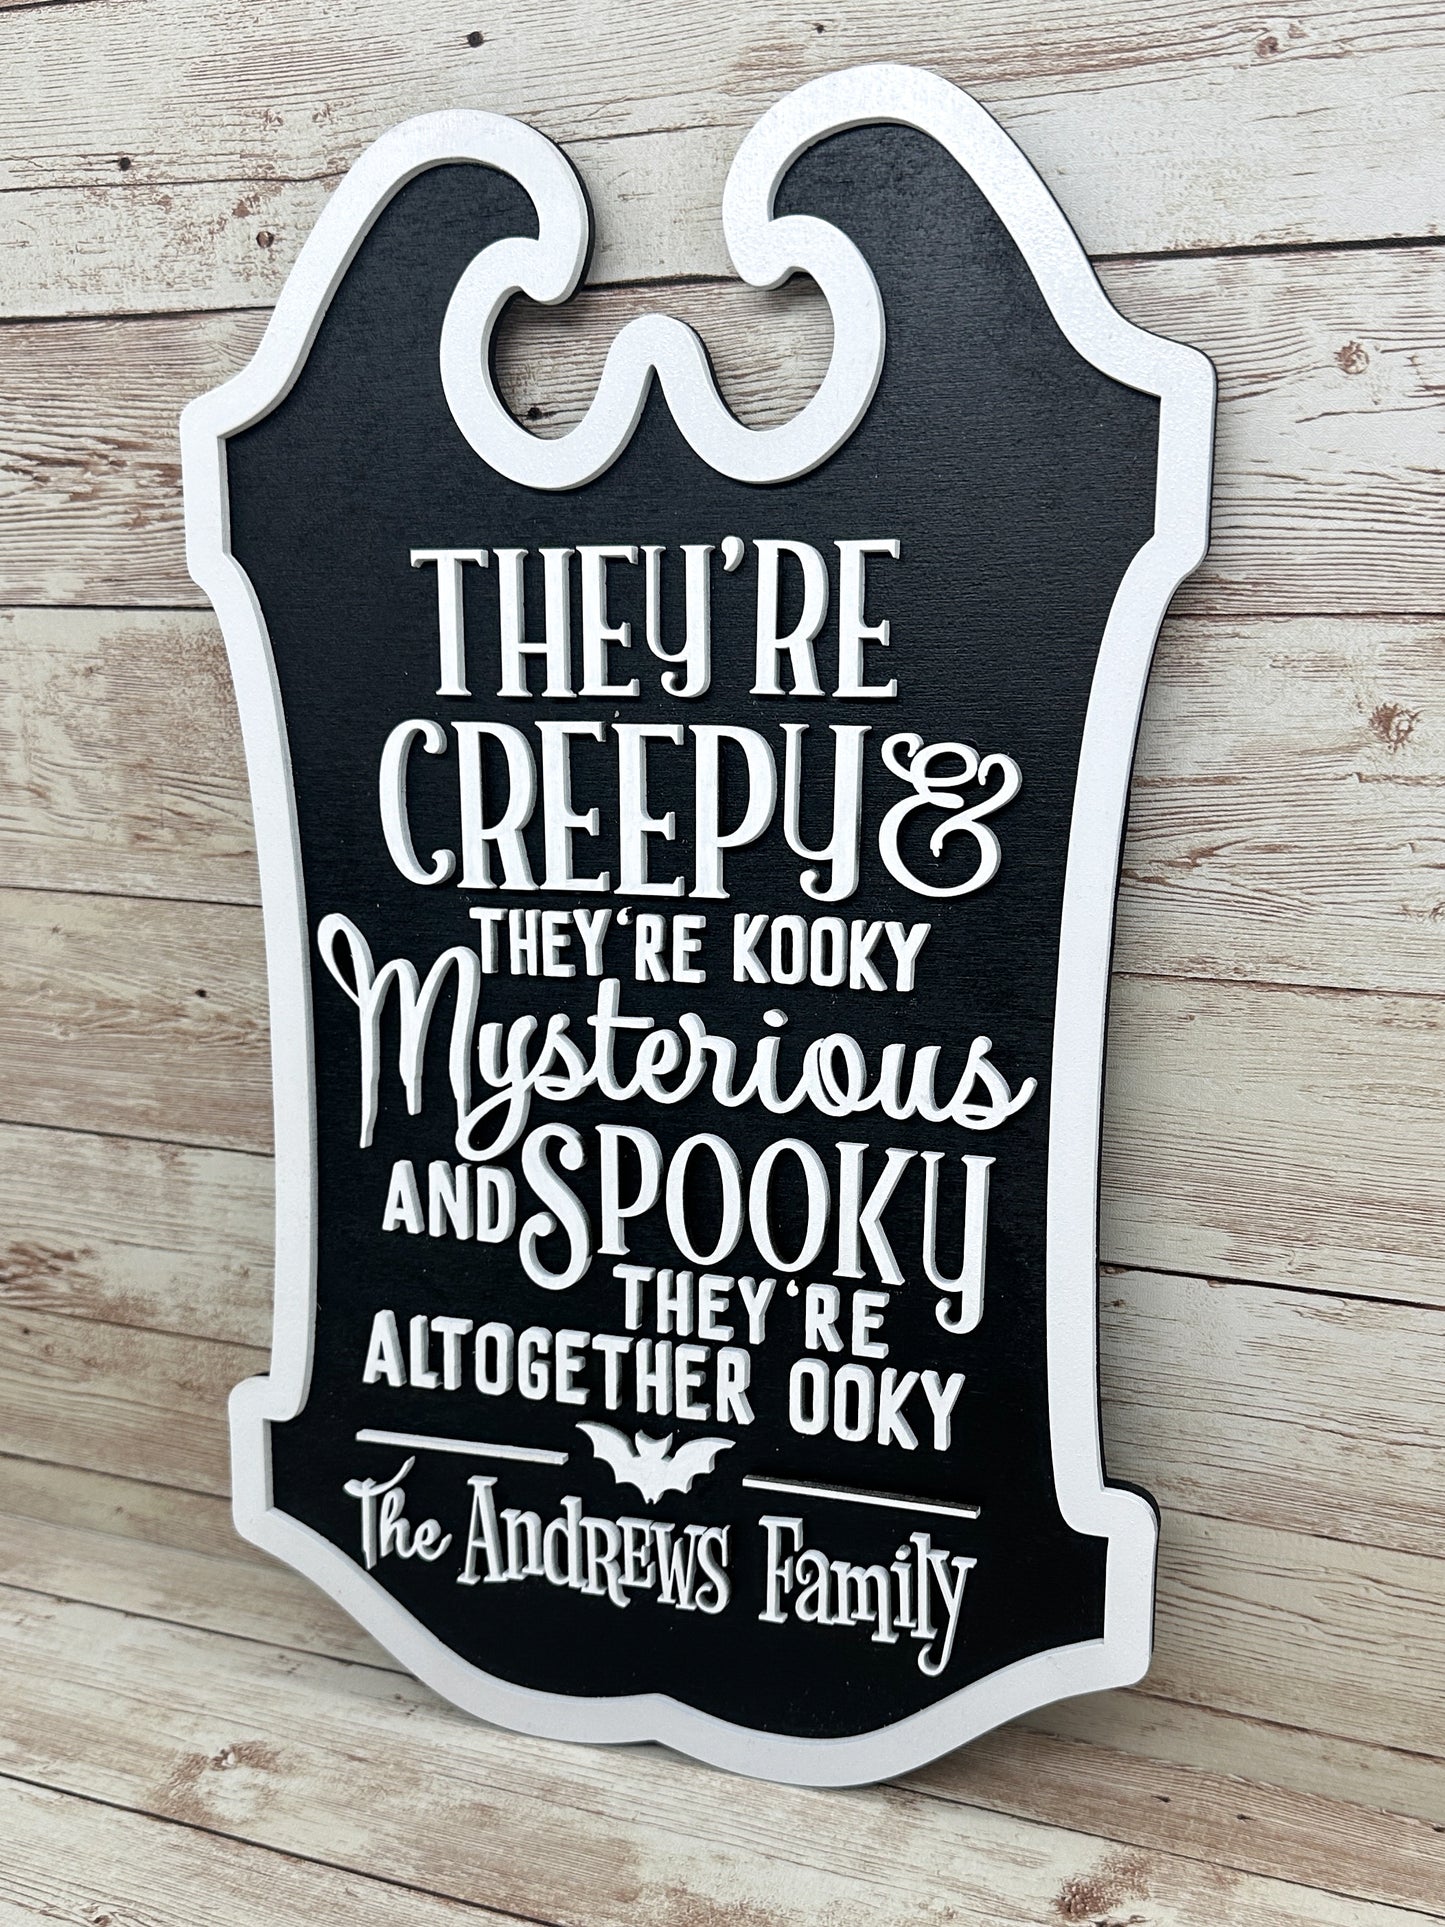 Personalized They’re Creepy and They’re Kooky | Family Sign | Black & White | Halloween Decor | Wooden Sign